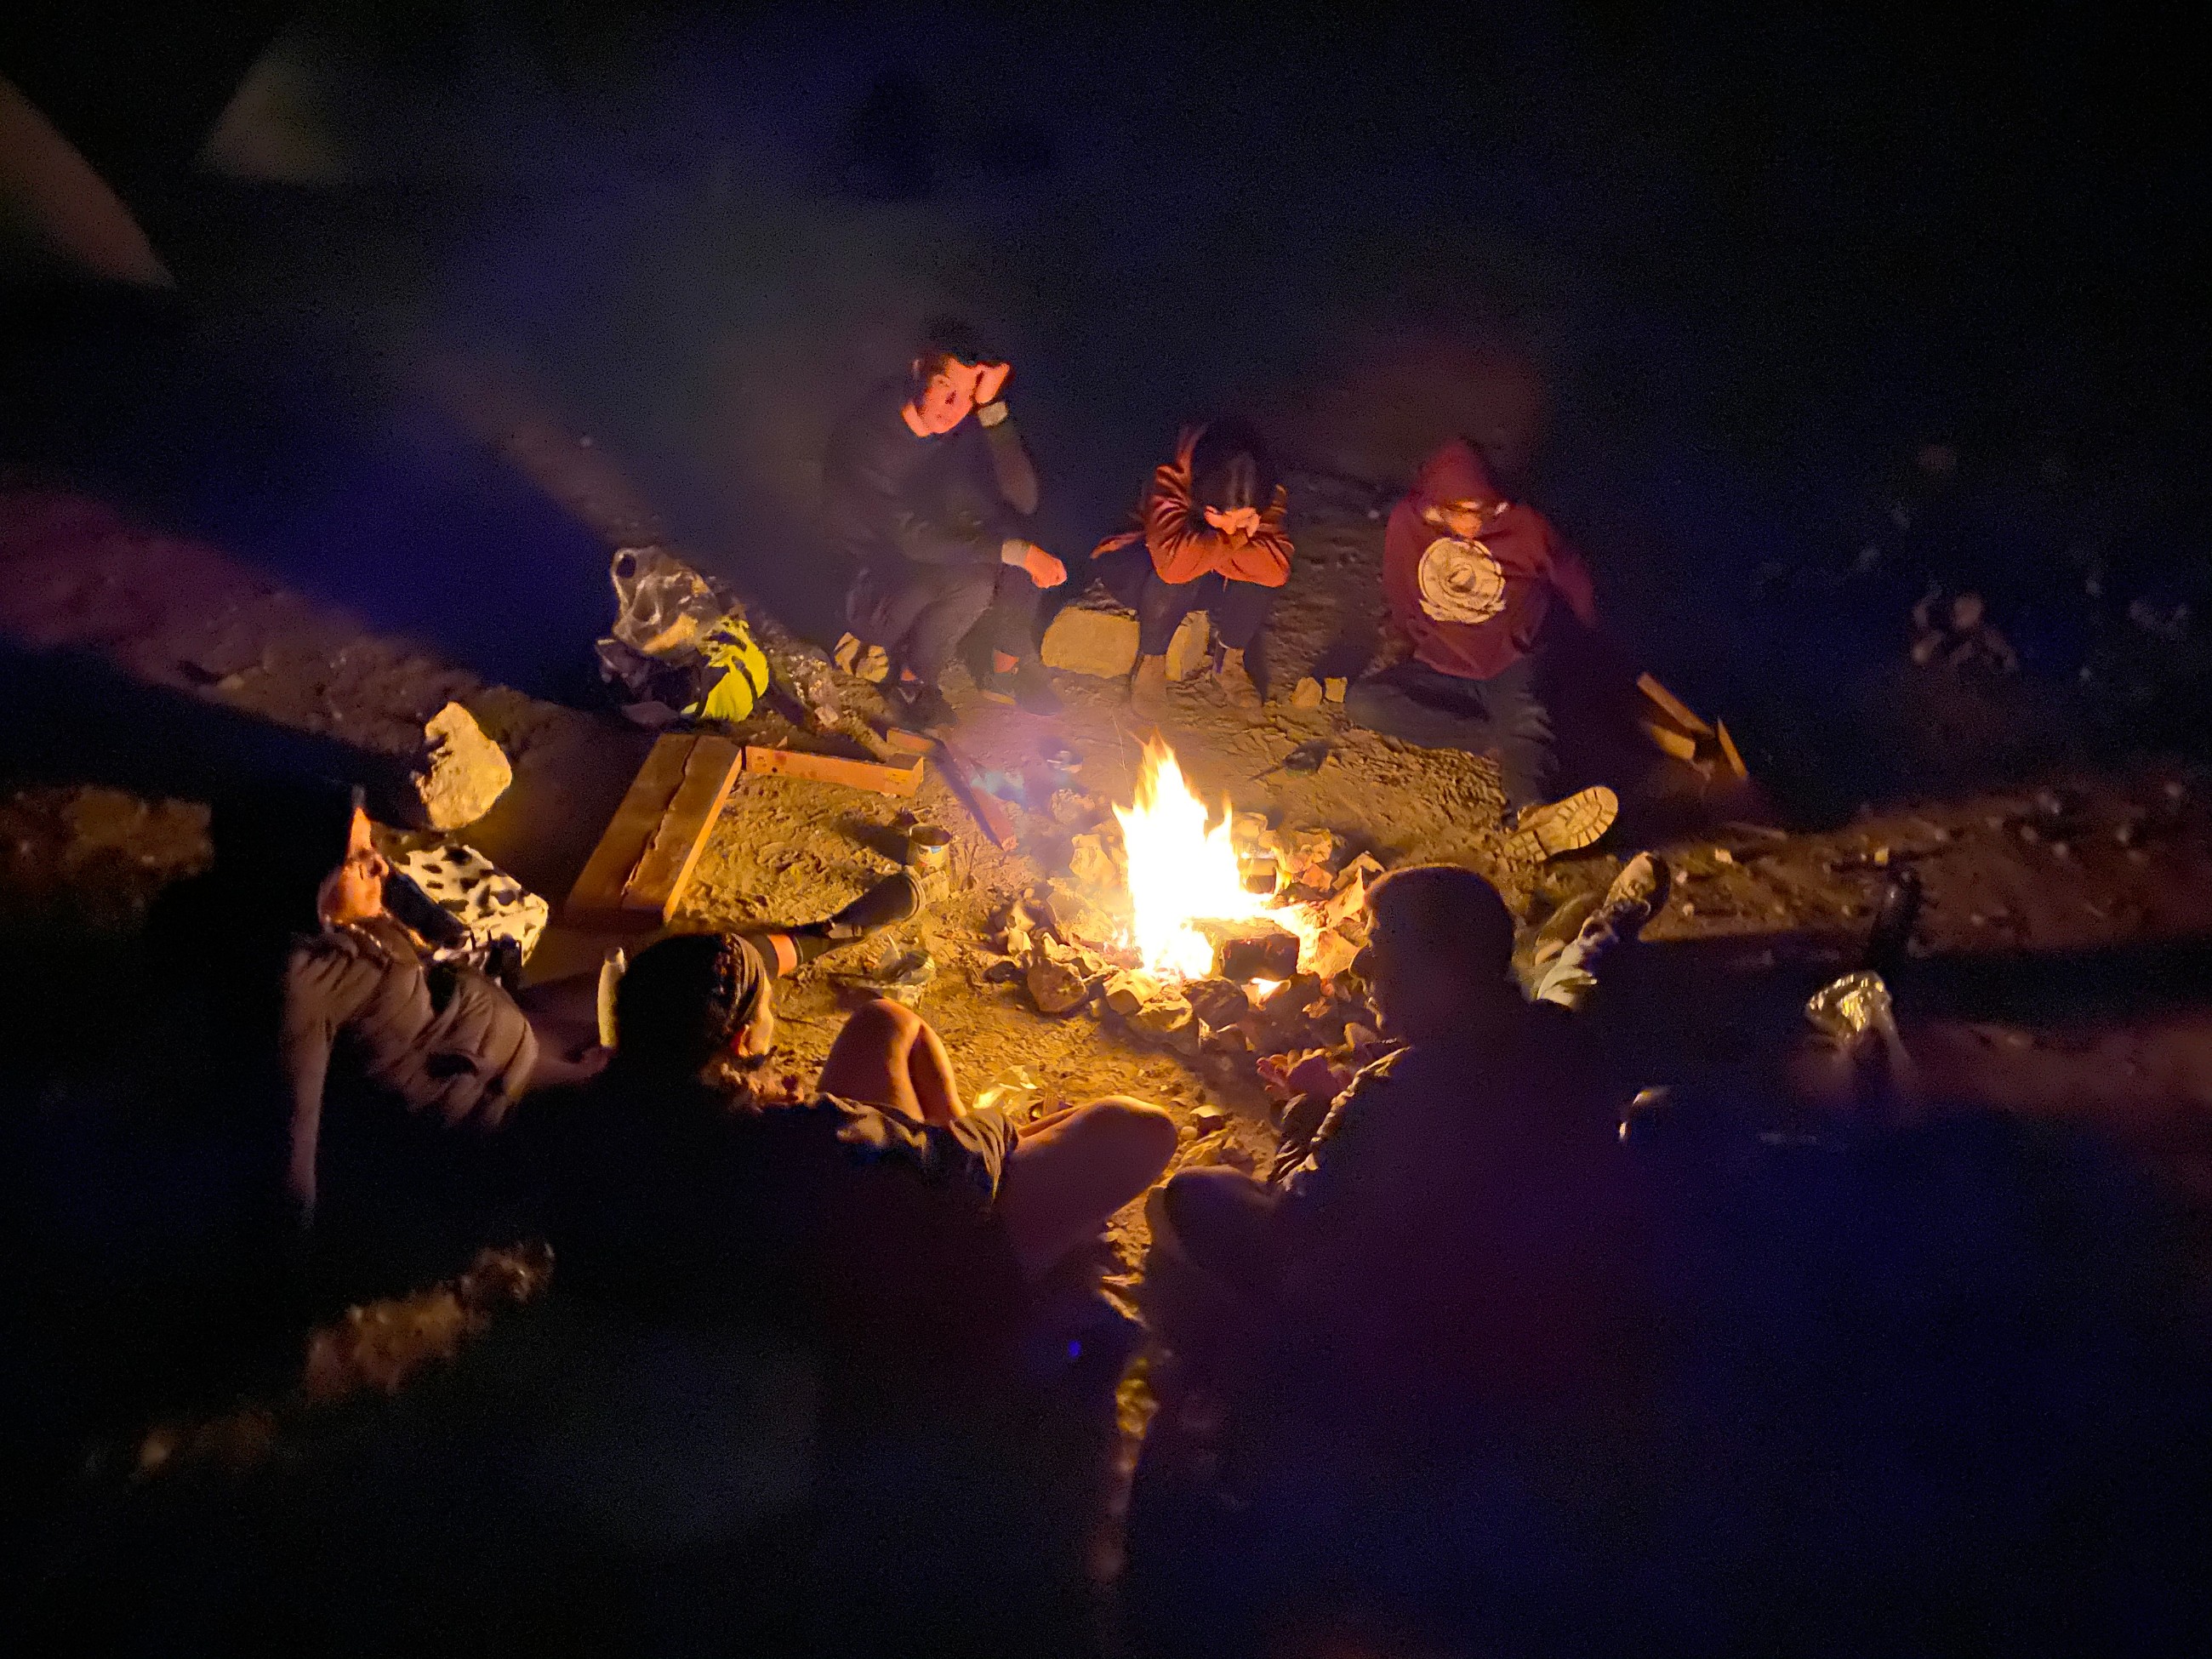 My friends and I sitting around a camp fire